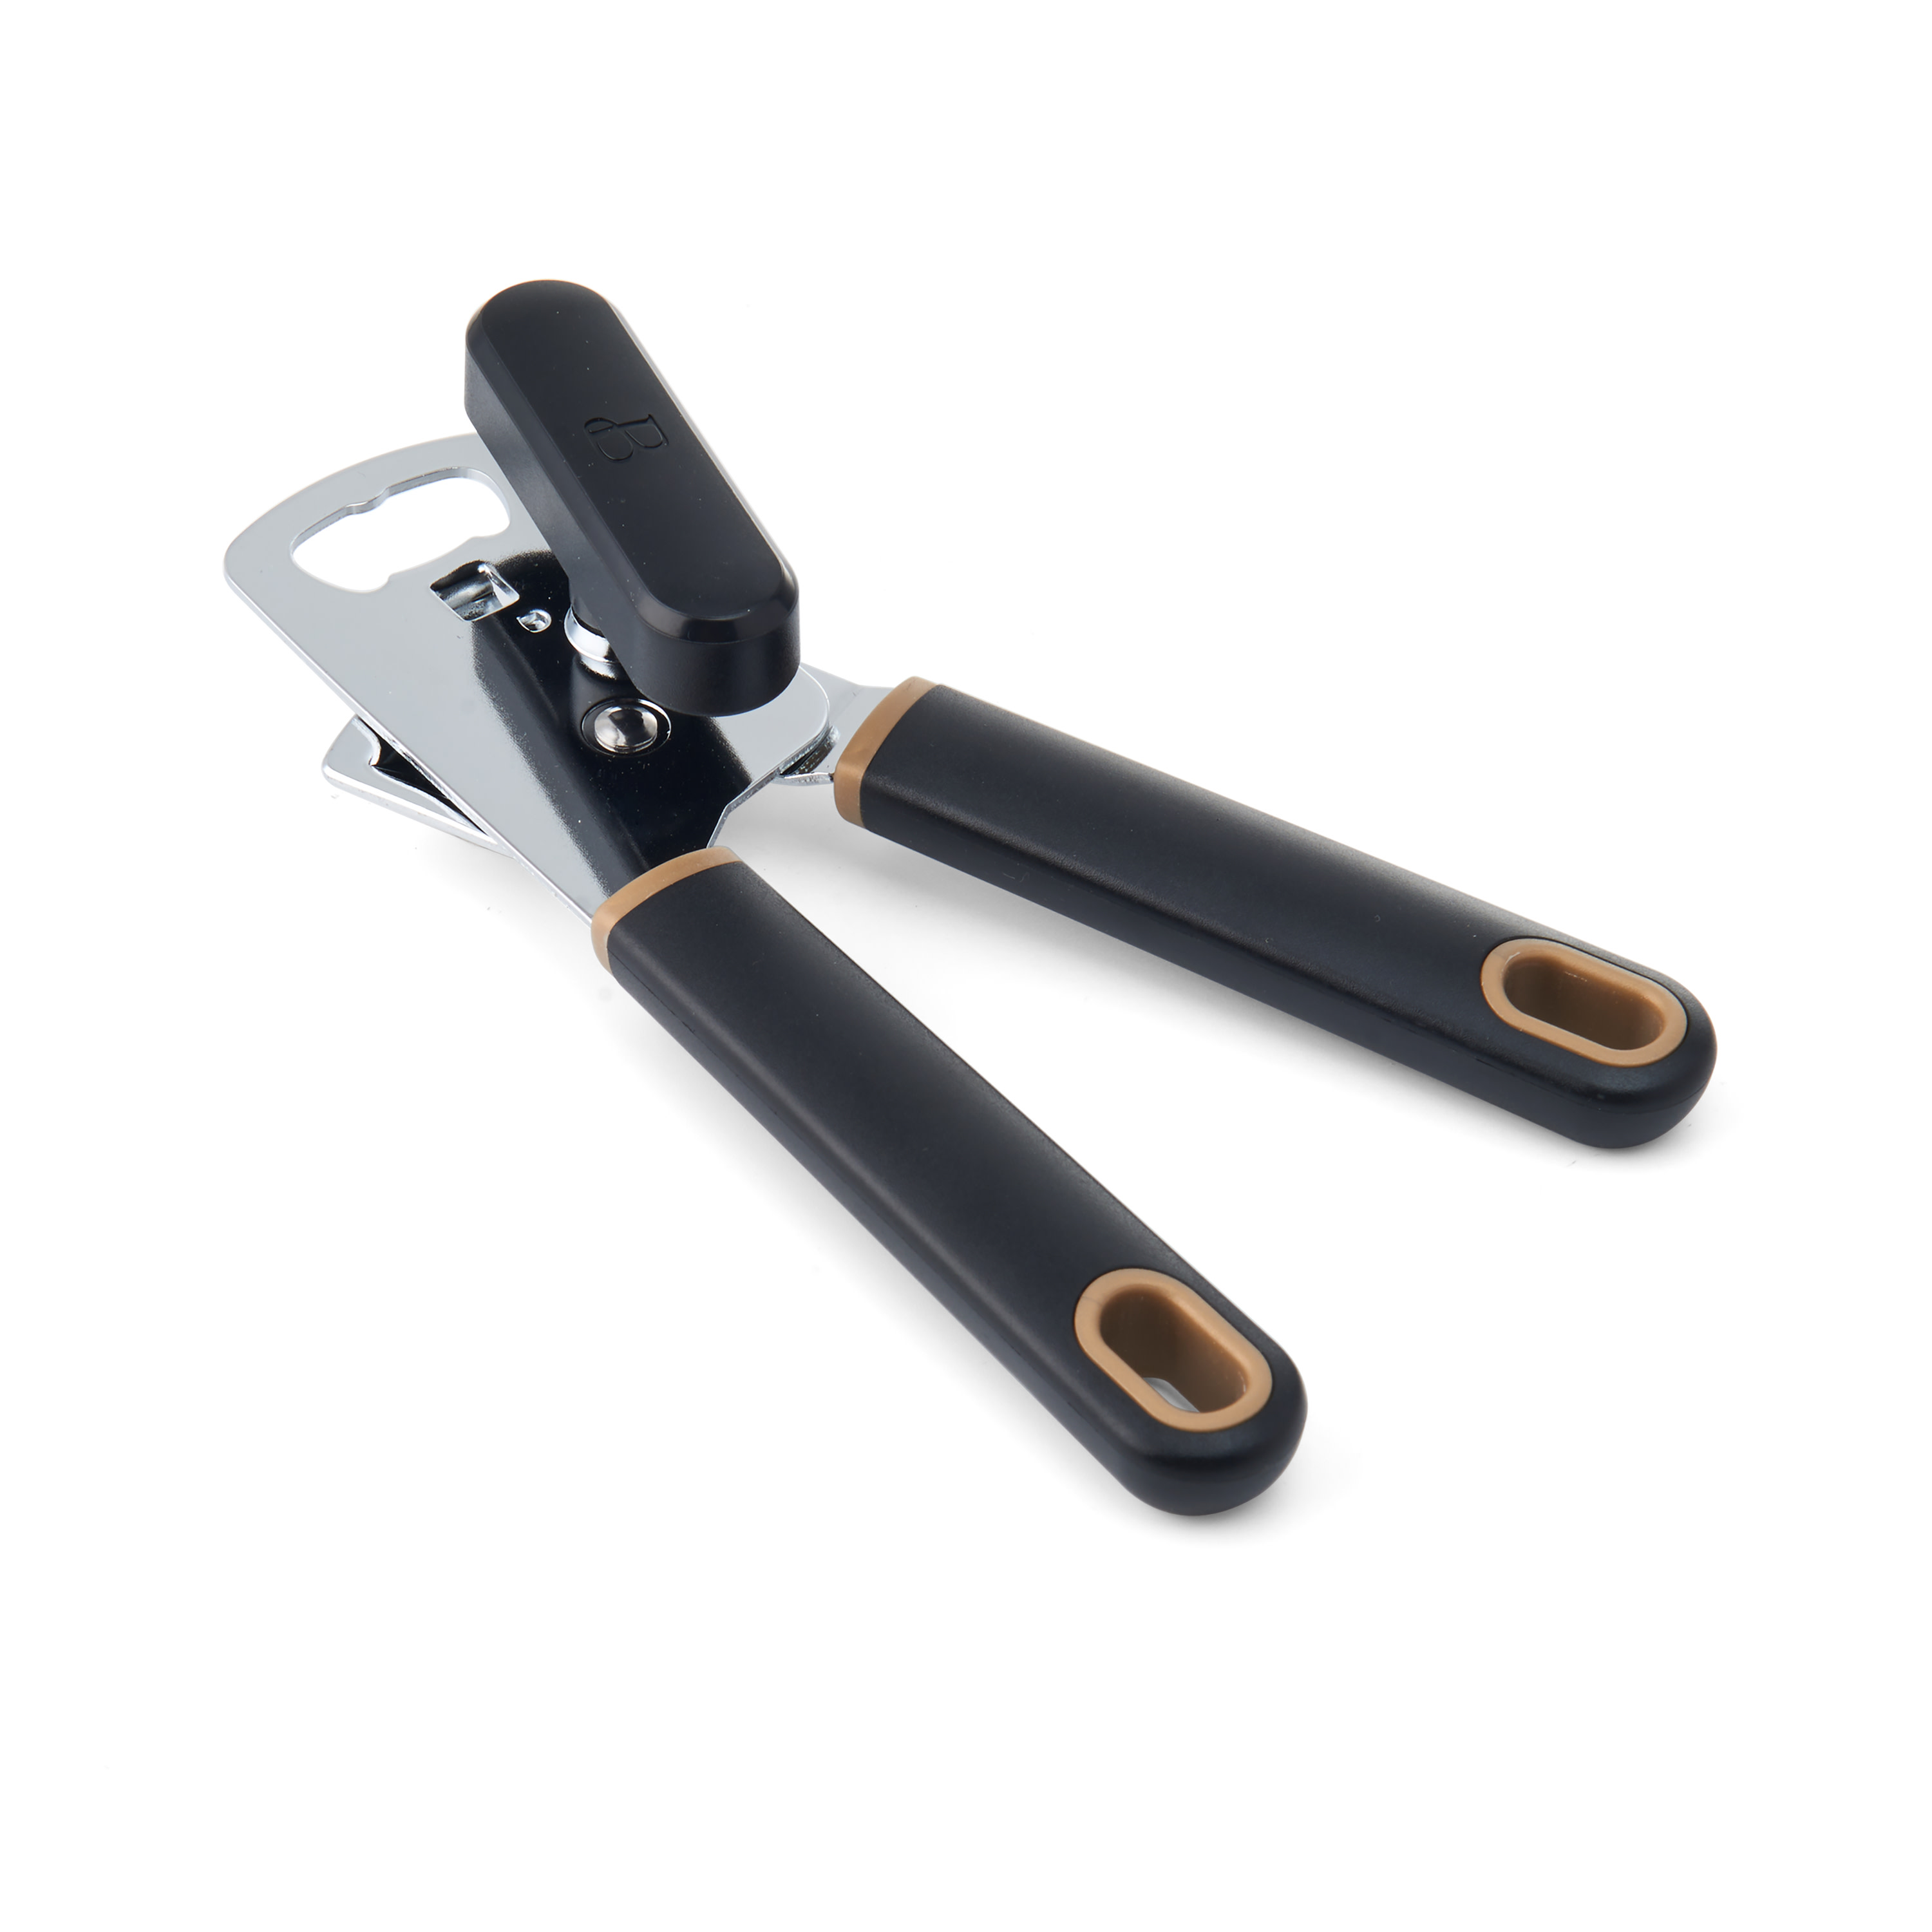 Beautiful Can Opener with Built in Bottle Opener in Black Sesame by Drew Barrymore - image 4 of 7